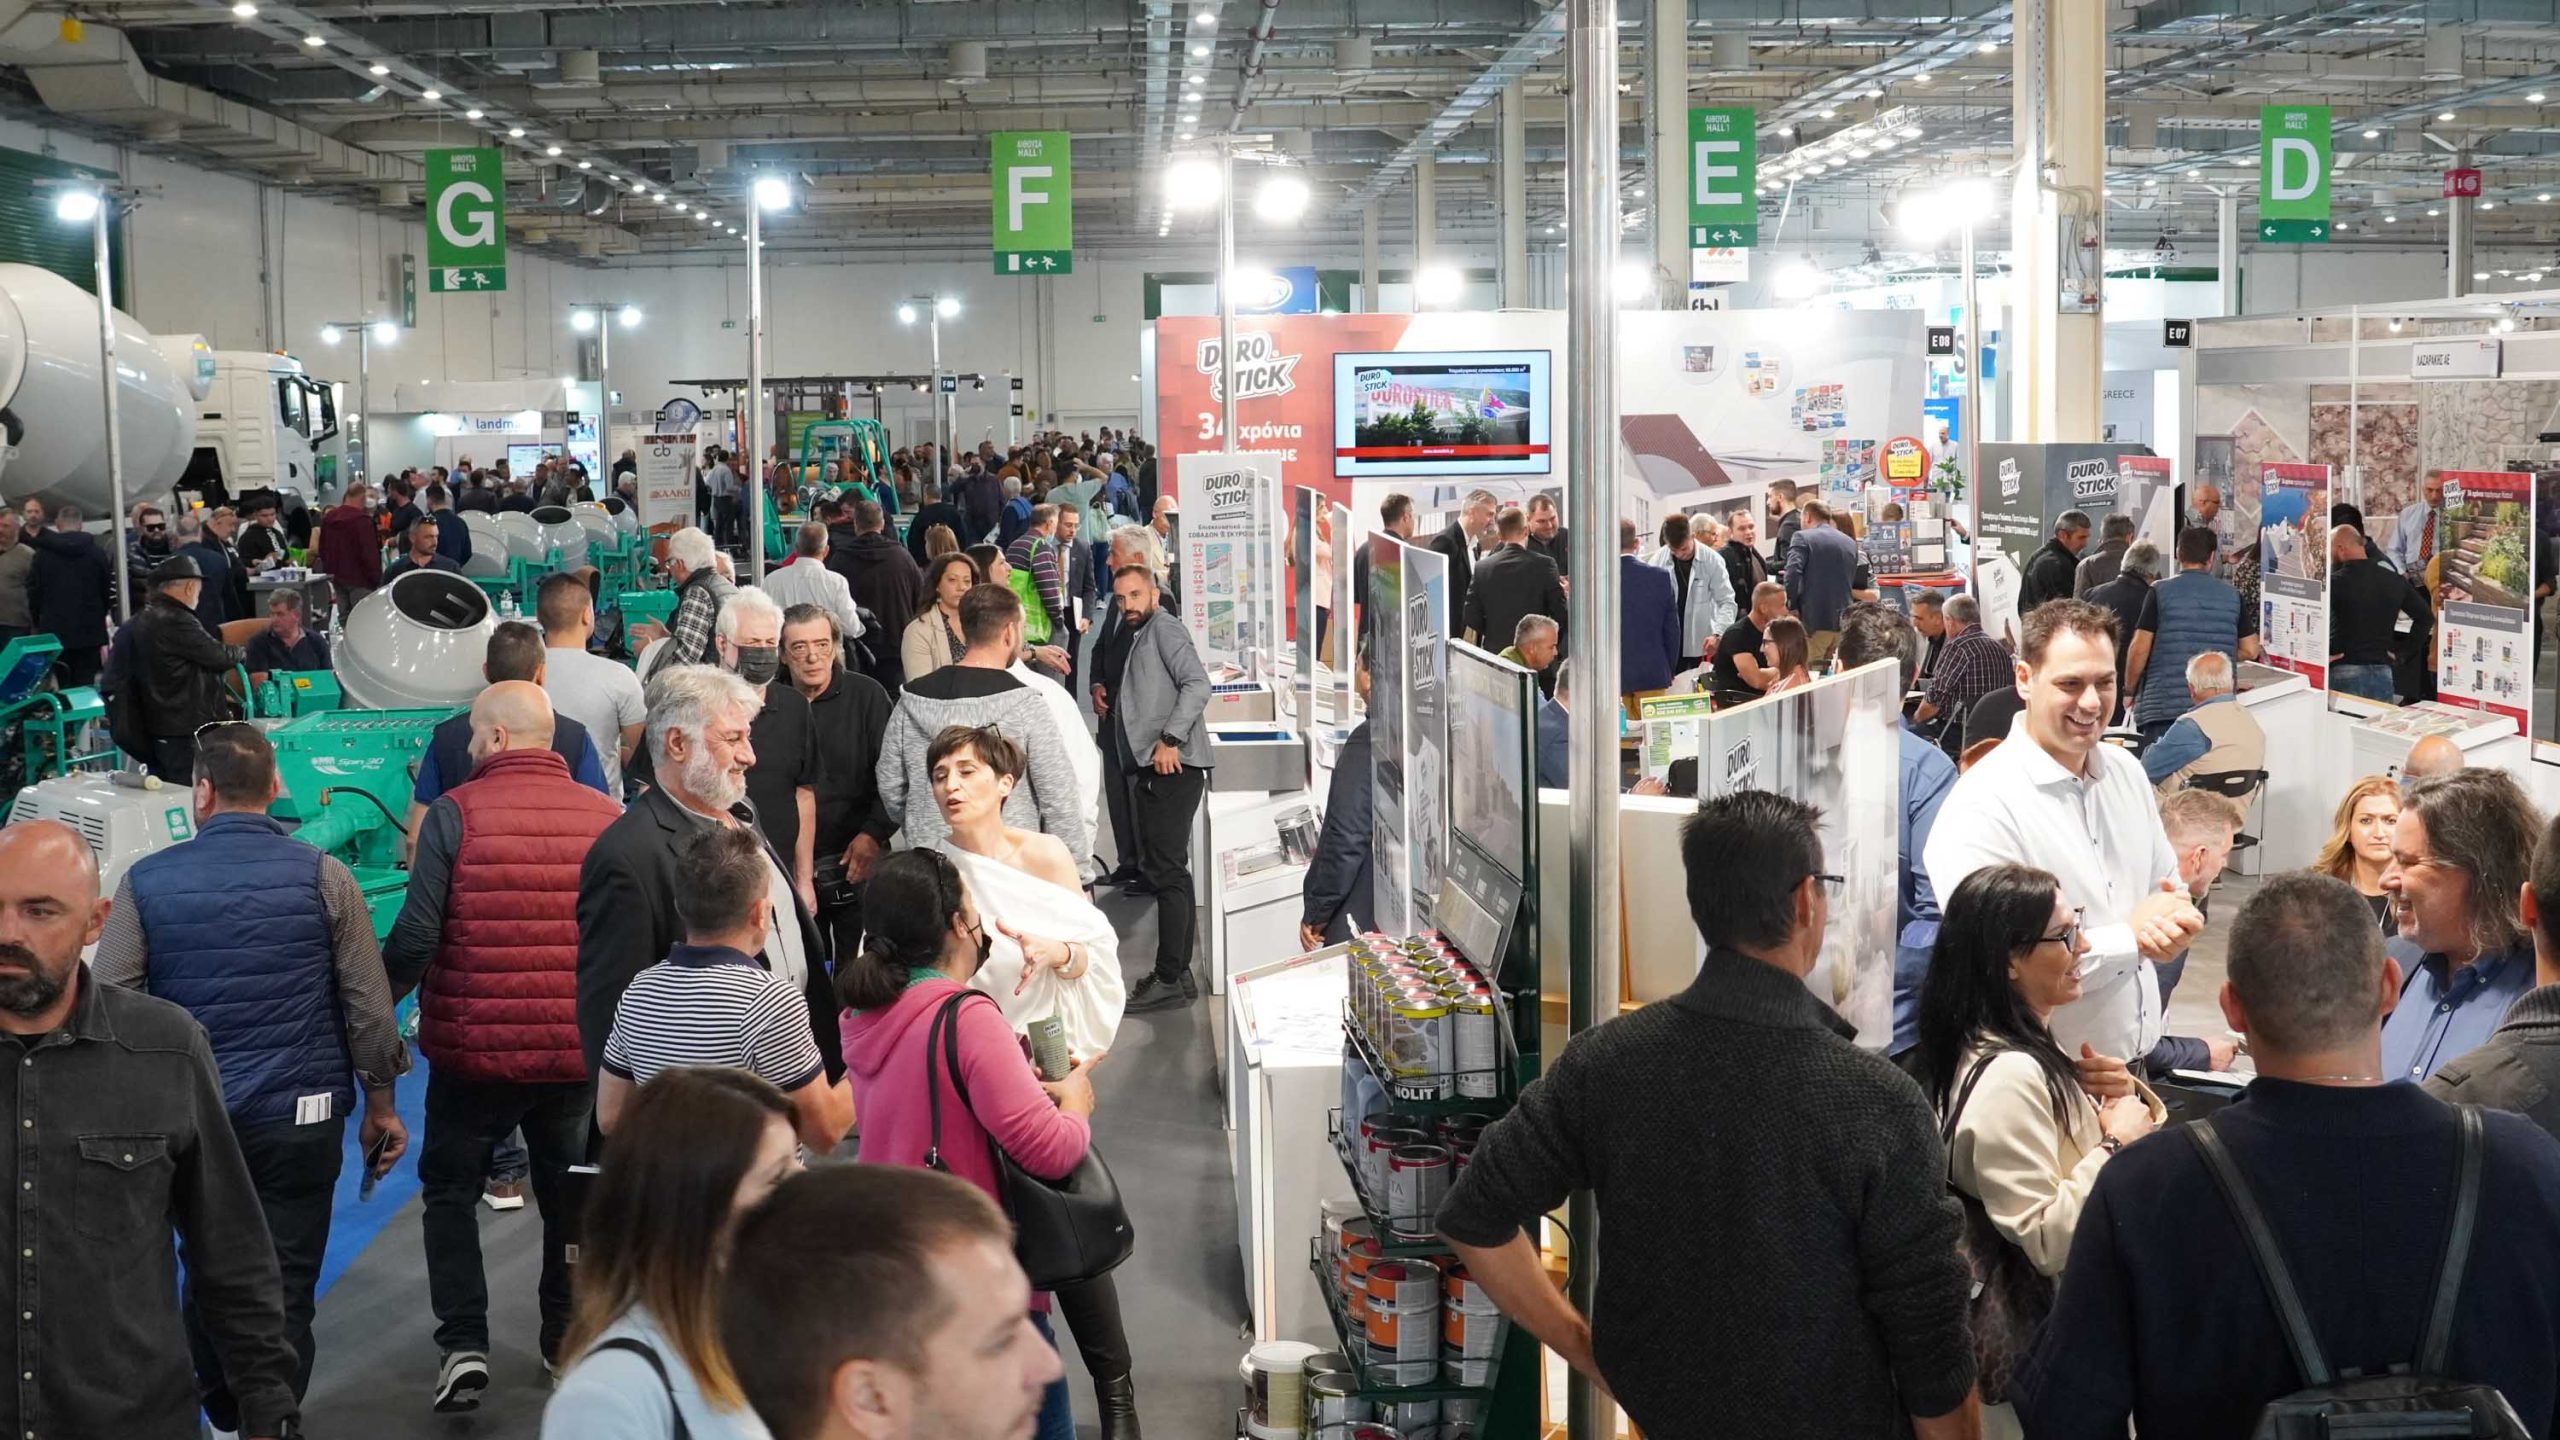 Upcoming MDF Expo 2022 show in Athens - Greece